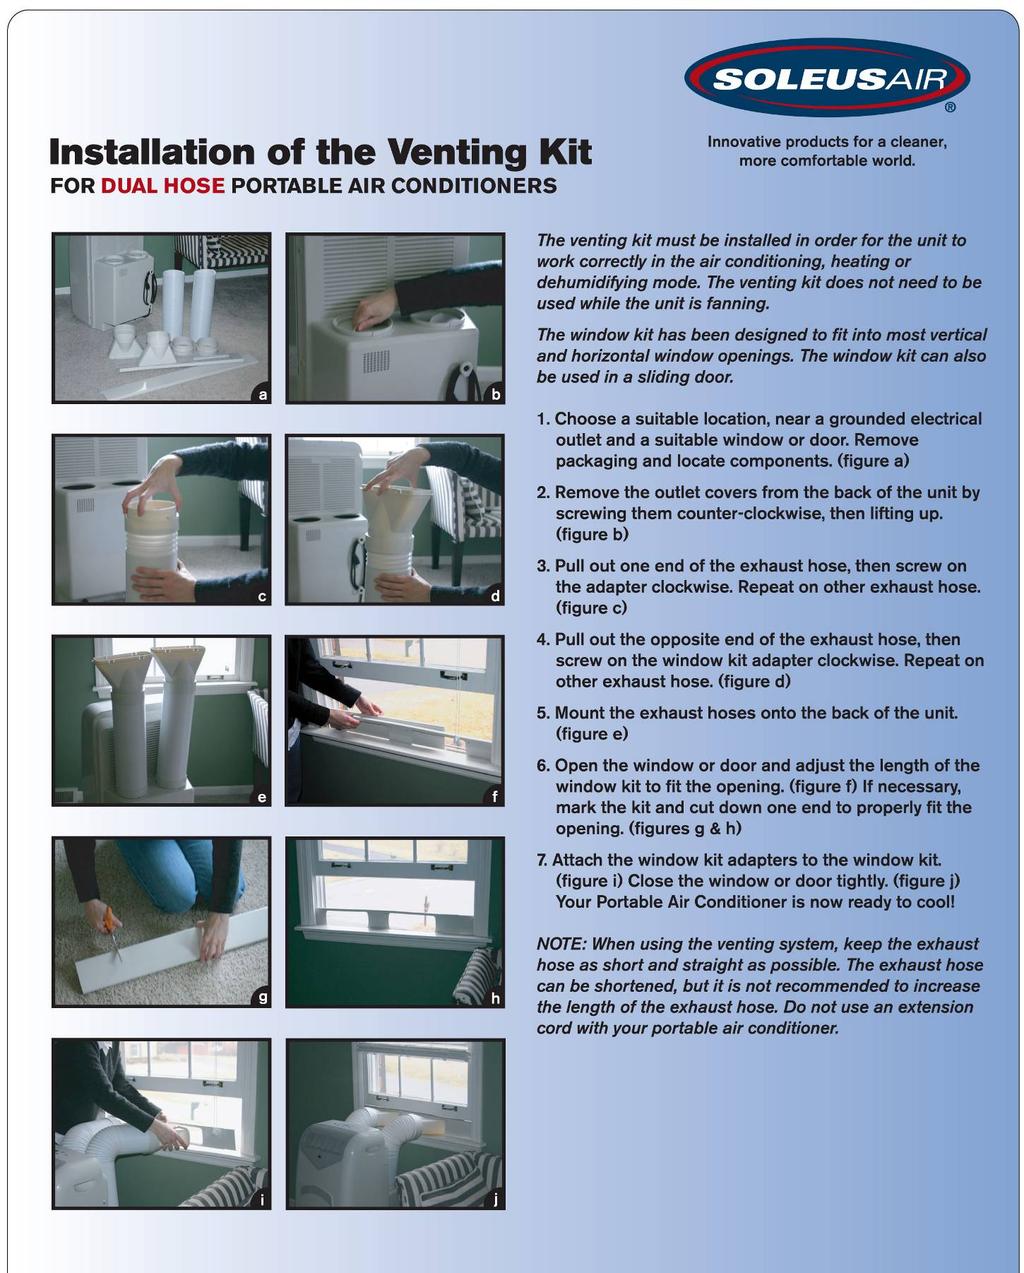 VENTING KIT INSTALLATION NOTE: The Portable Air Conditioner above may differ from the unit described in this